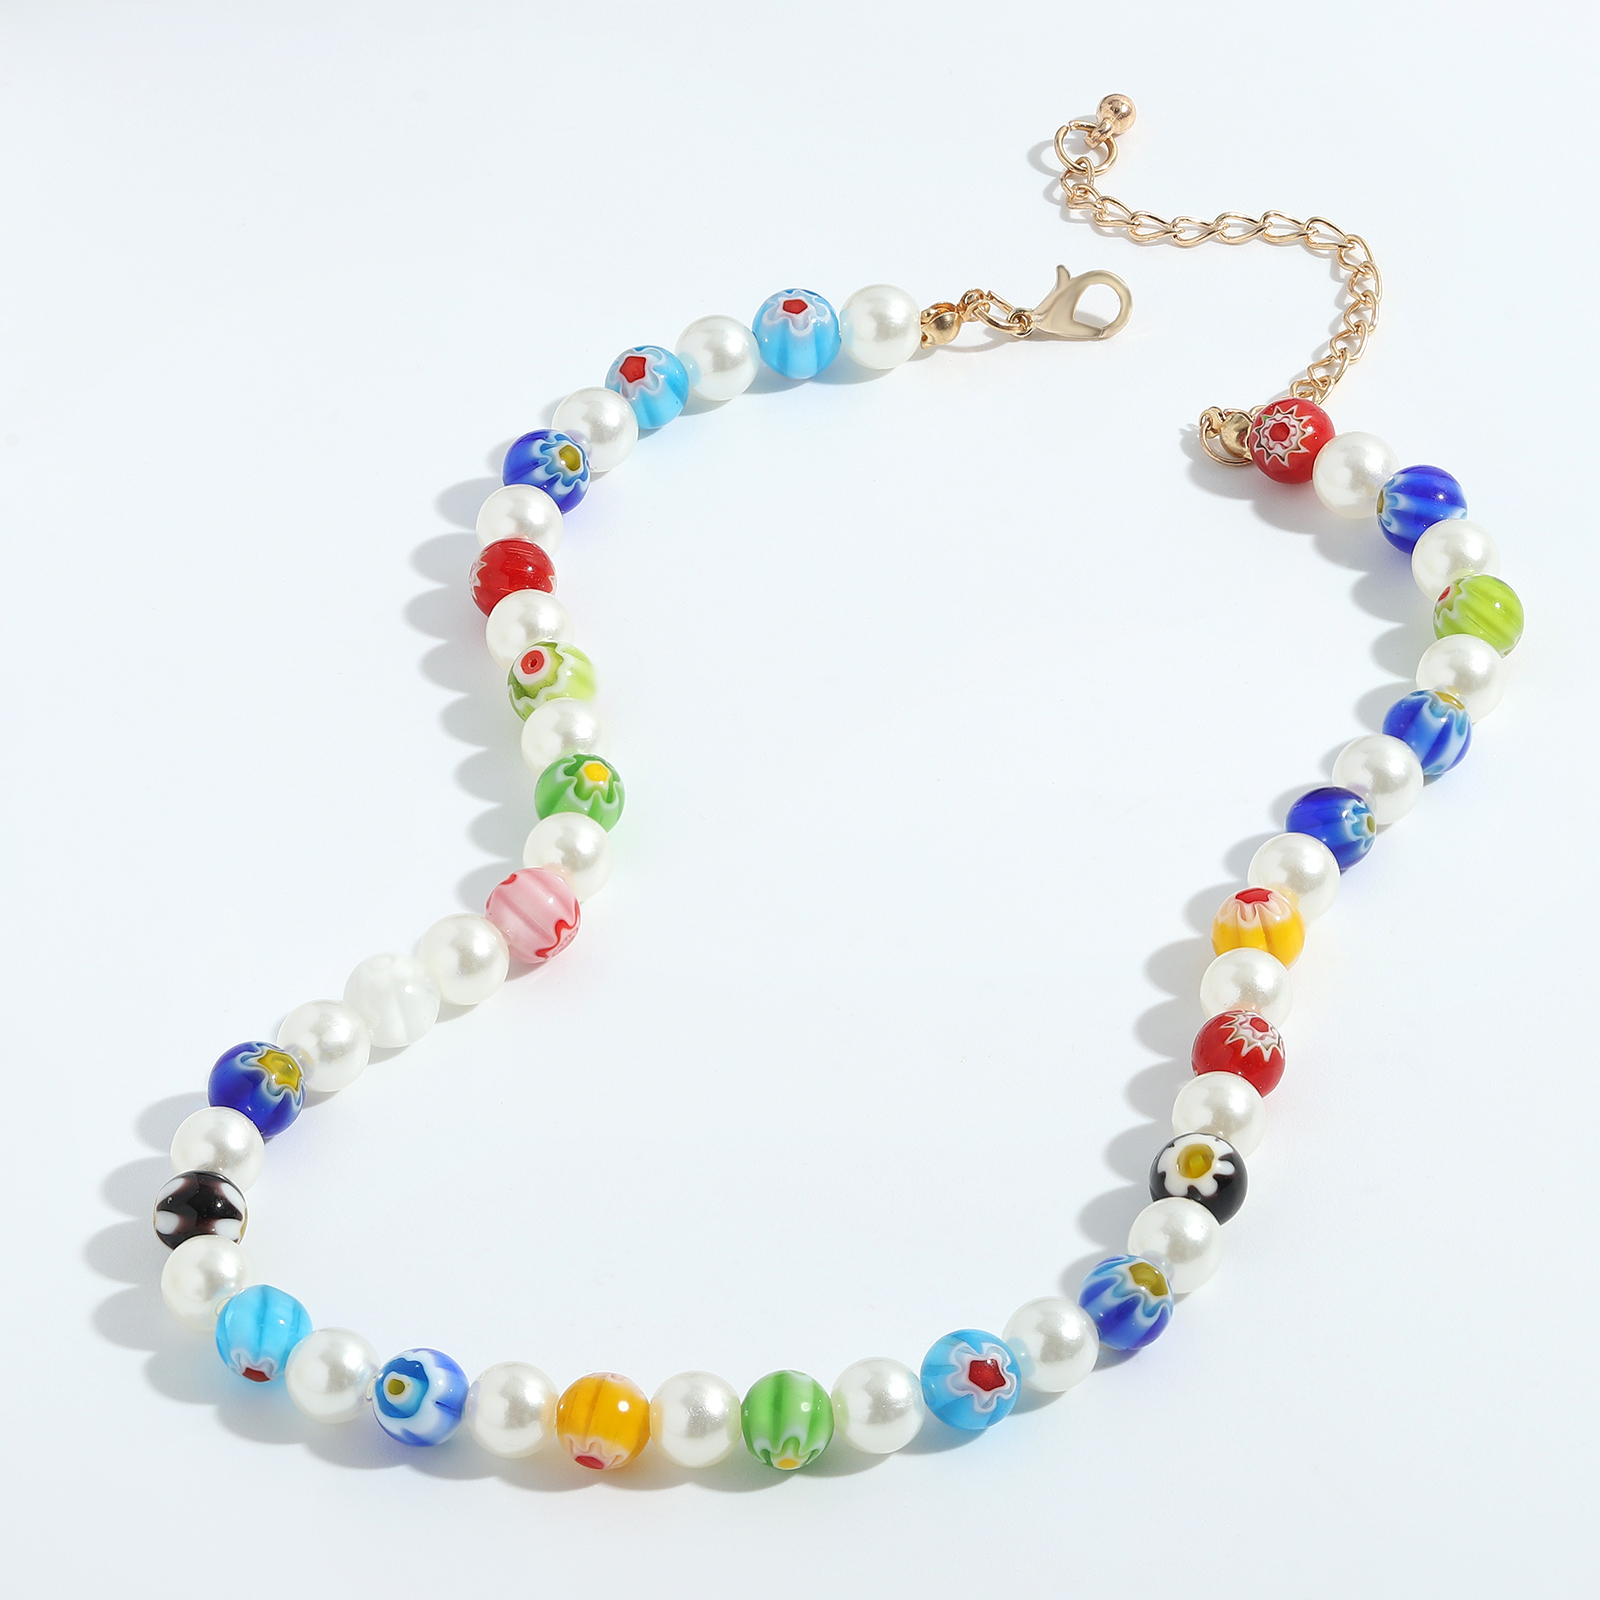 New fashion style trend line fashion creative glass bead necklacepicture10